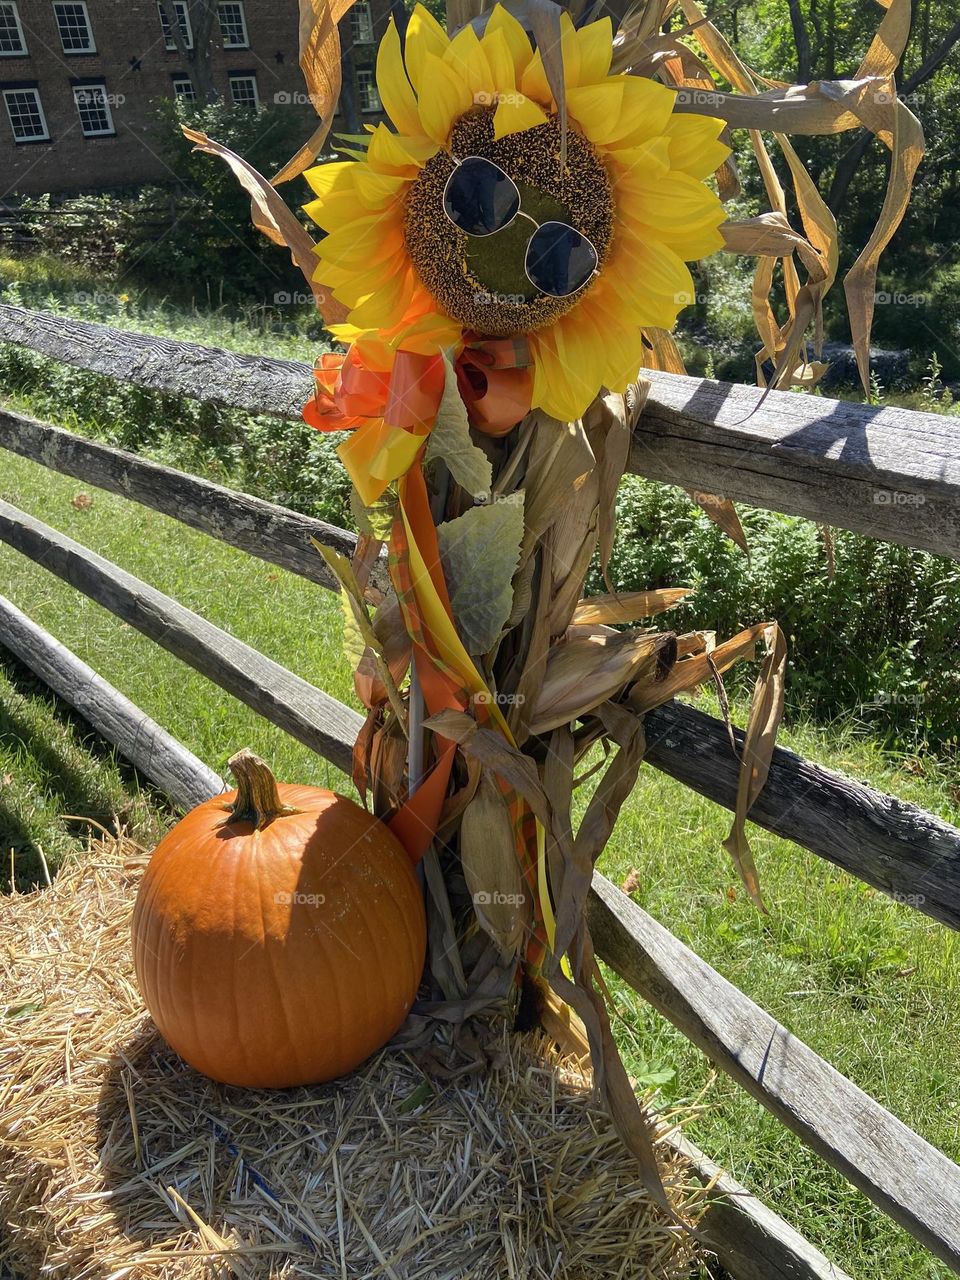 A sunflower decorated with sunglasses and sitting atop a bale of hay next to a pumpkin at a recent Fall Craft Fair at Allaire State Park. The green grass and plants of a neighboring field are in the background. This is country chic at its finest. 